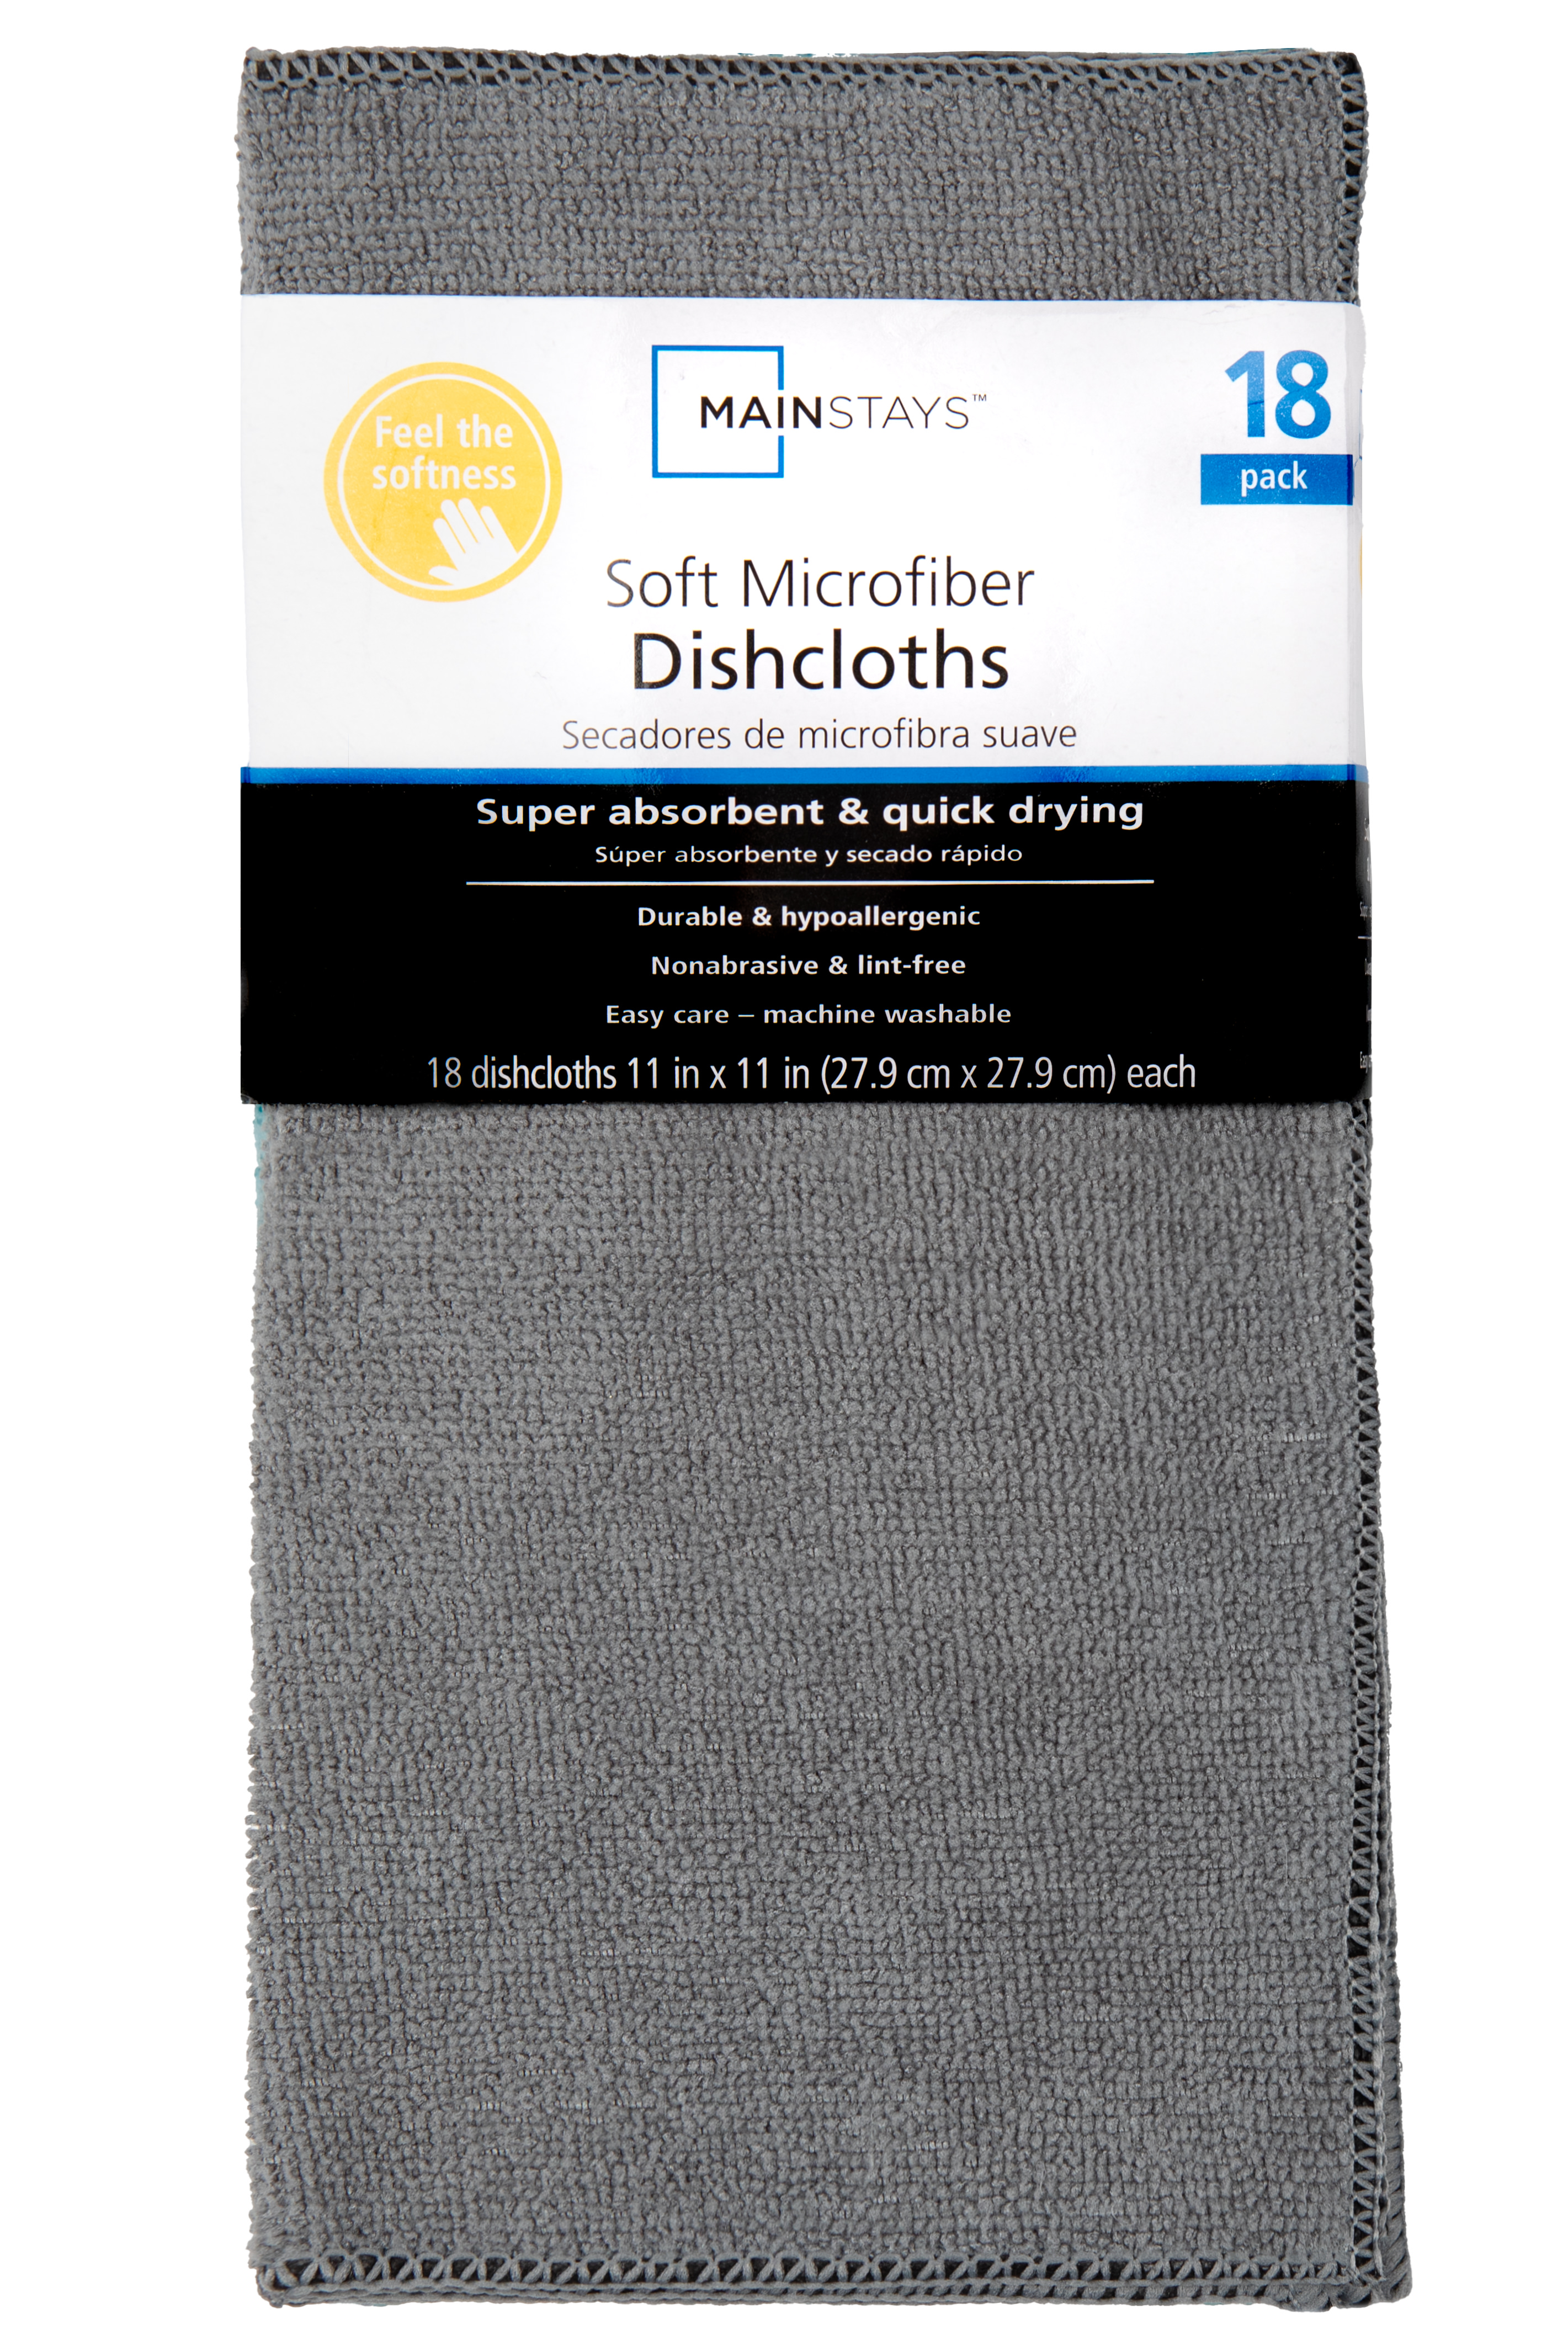 Mainstays Microfiber Assorted Solid Colors Dishcloths, 18 Piece - image 3 of 5